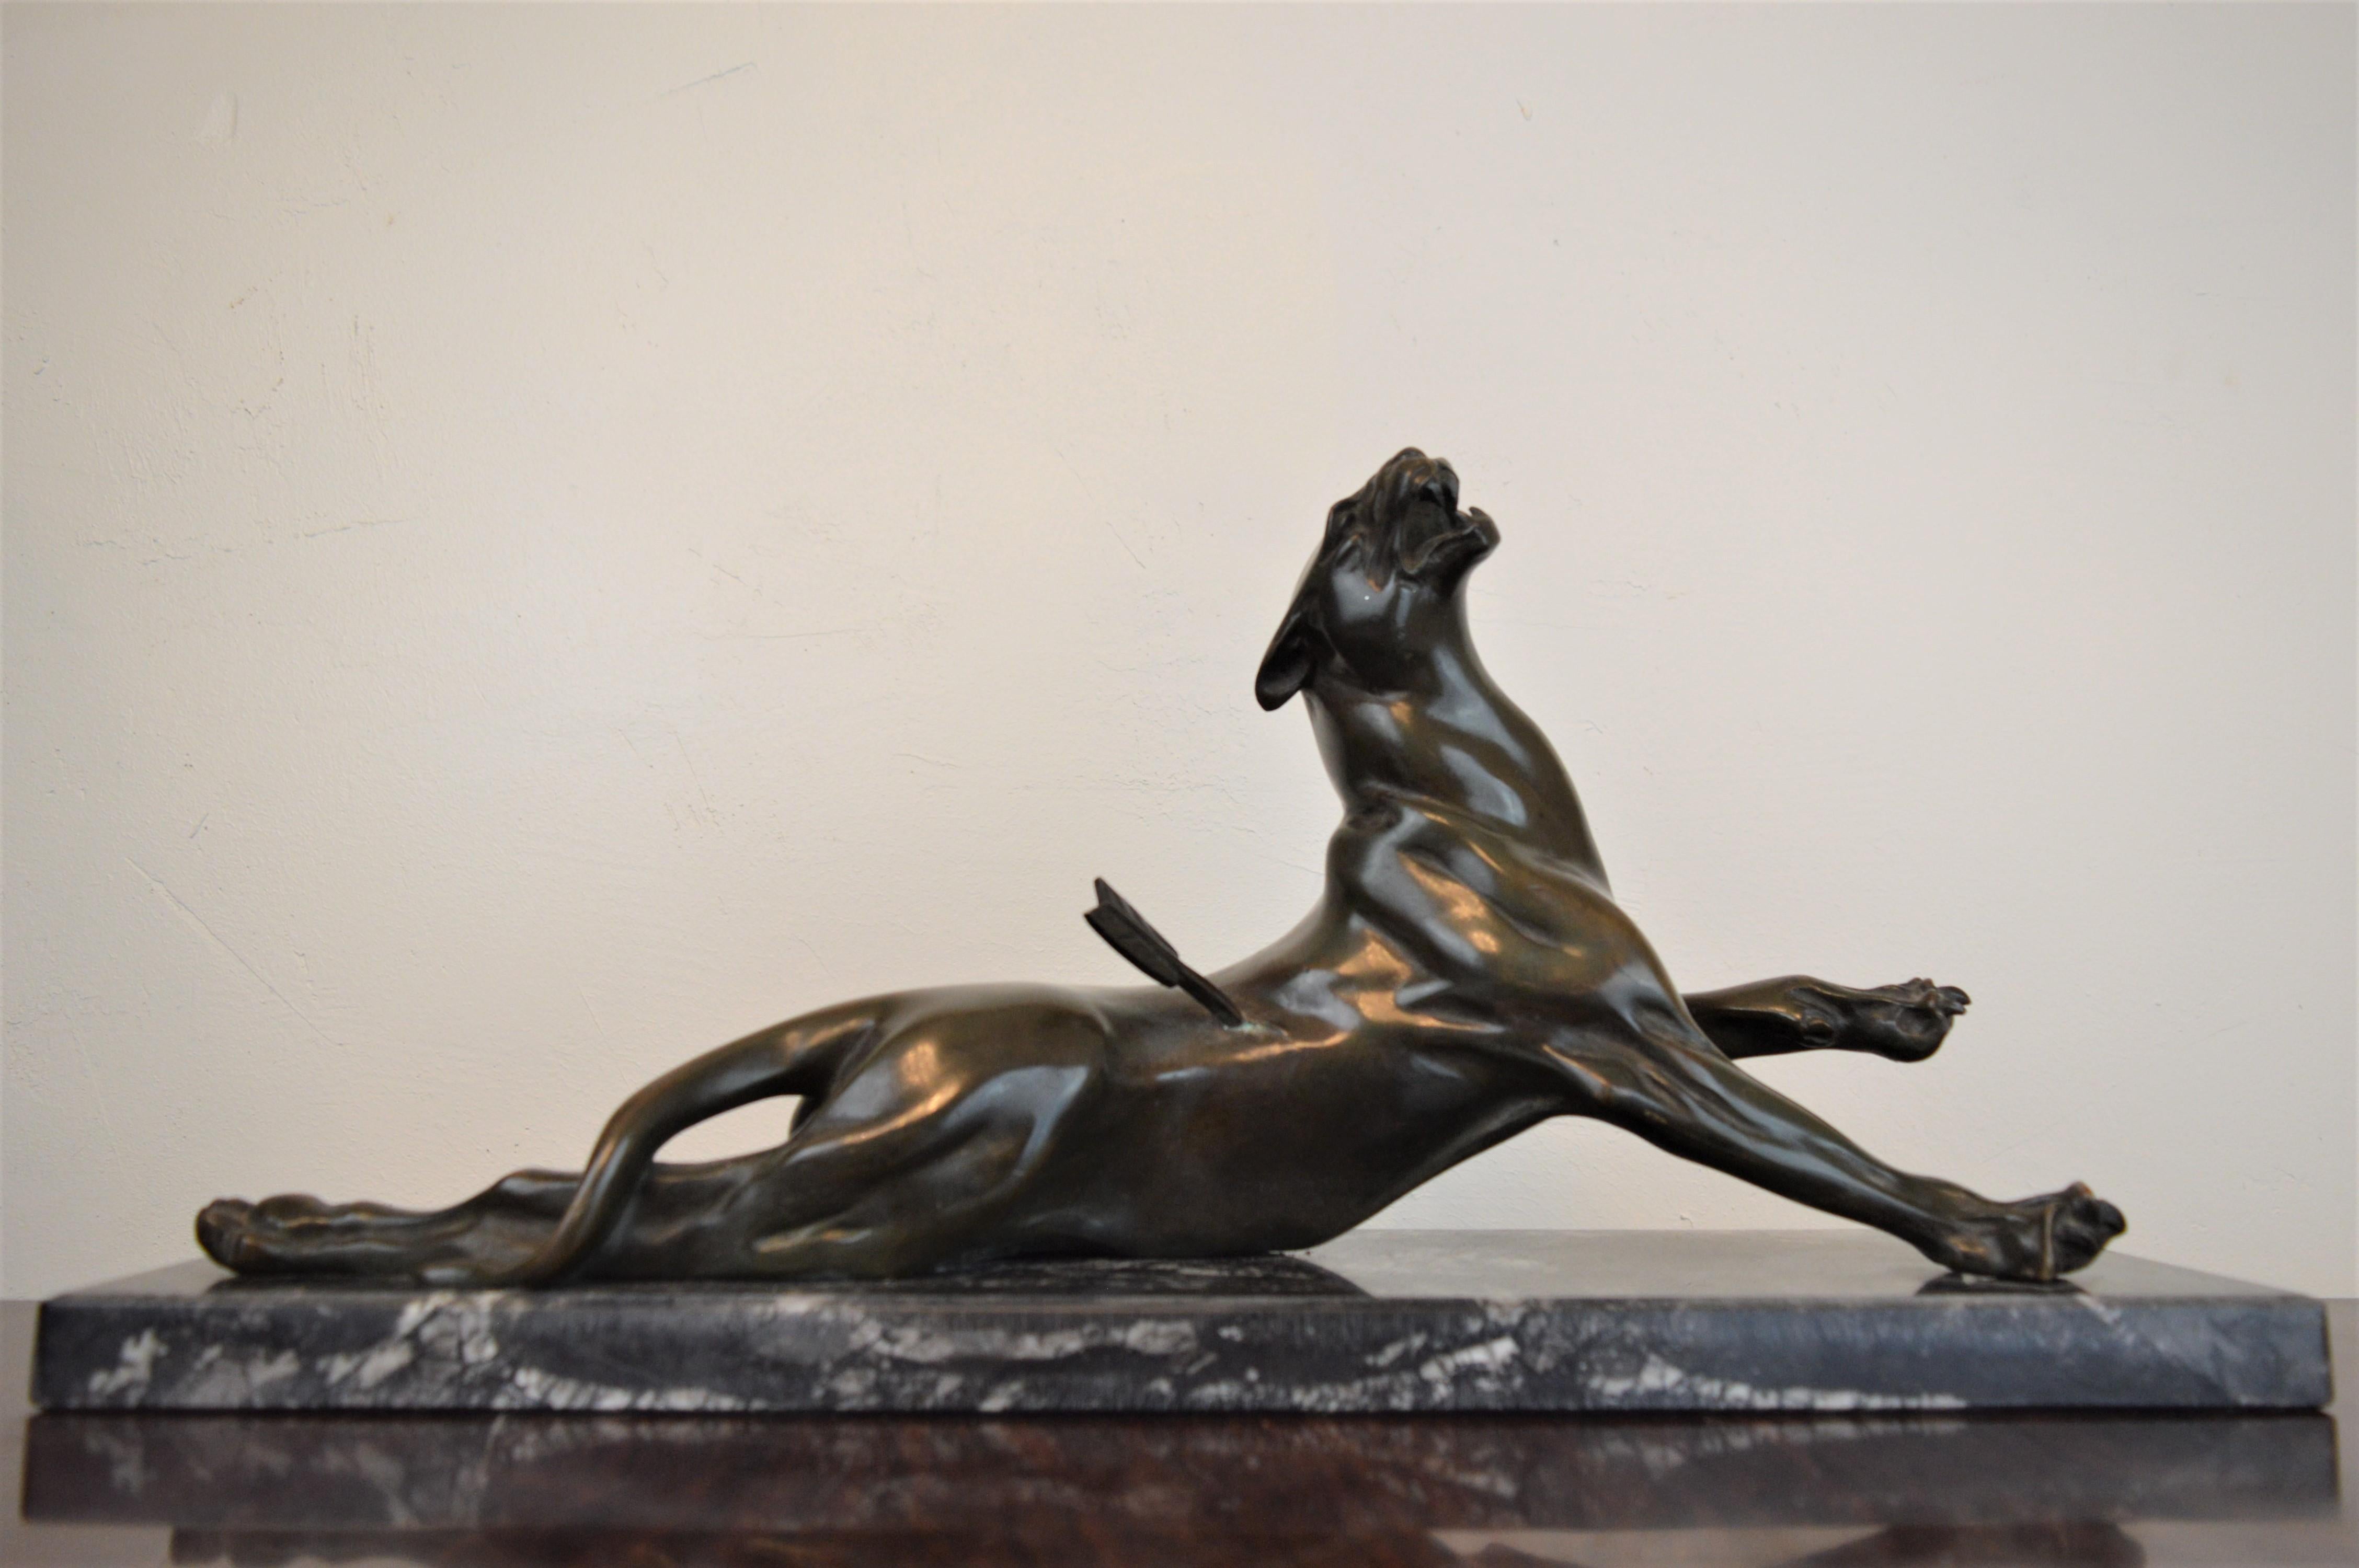 Beautiful sculpture of a wounded panther in bronze, on a marble base. Amazing patina.